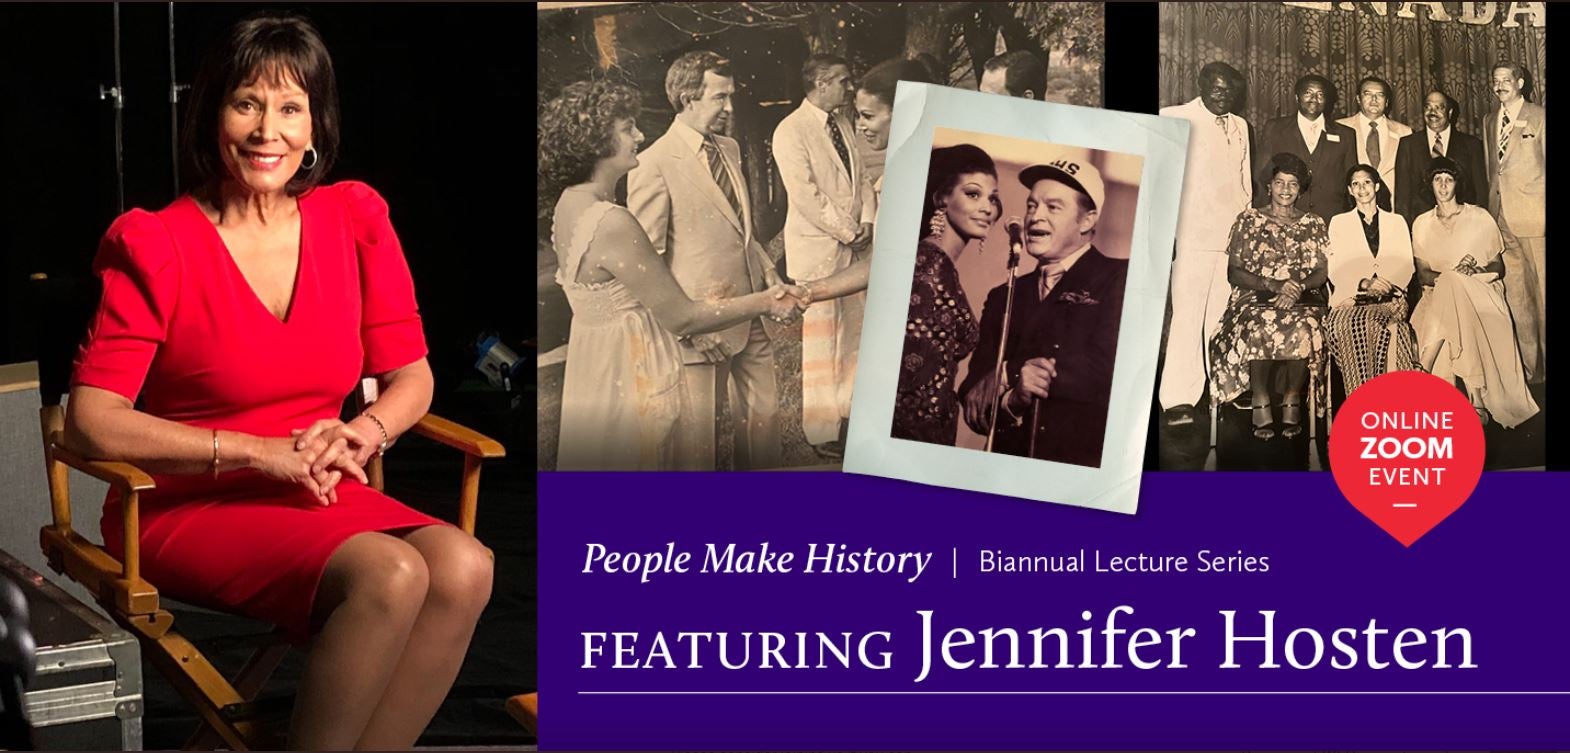 Jennifer Hosten and historical images from beauty pageant and diplomatic career